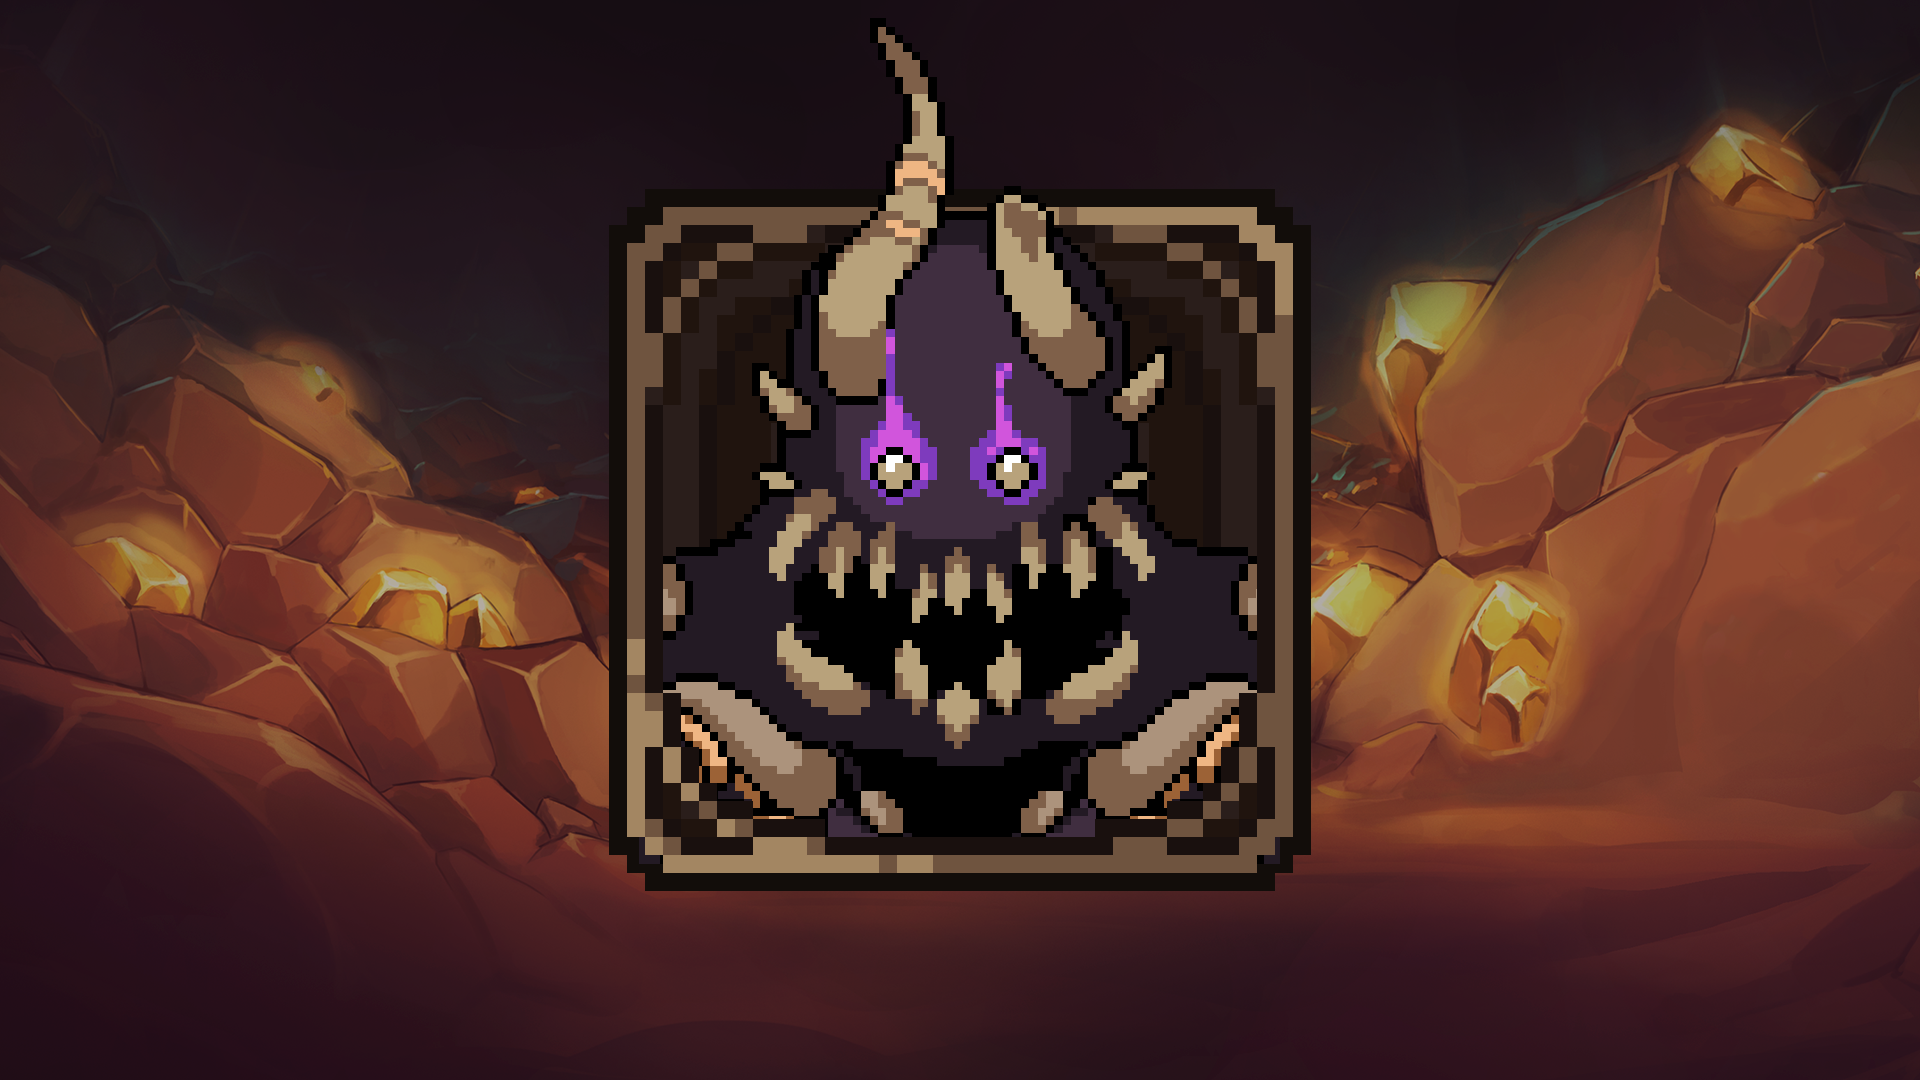 Icon for Deal with the Demon